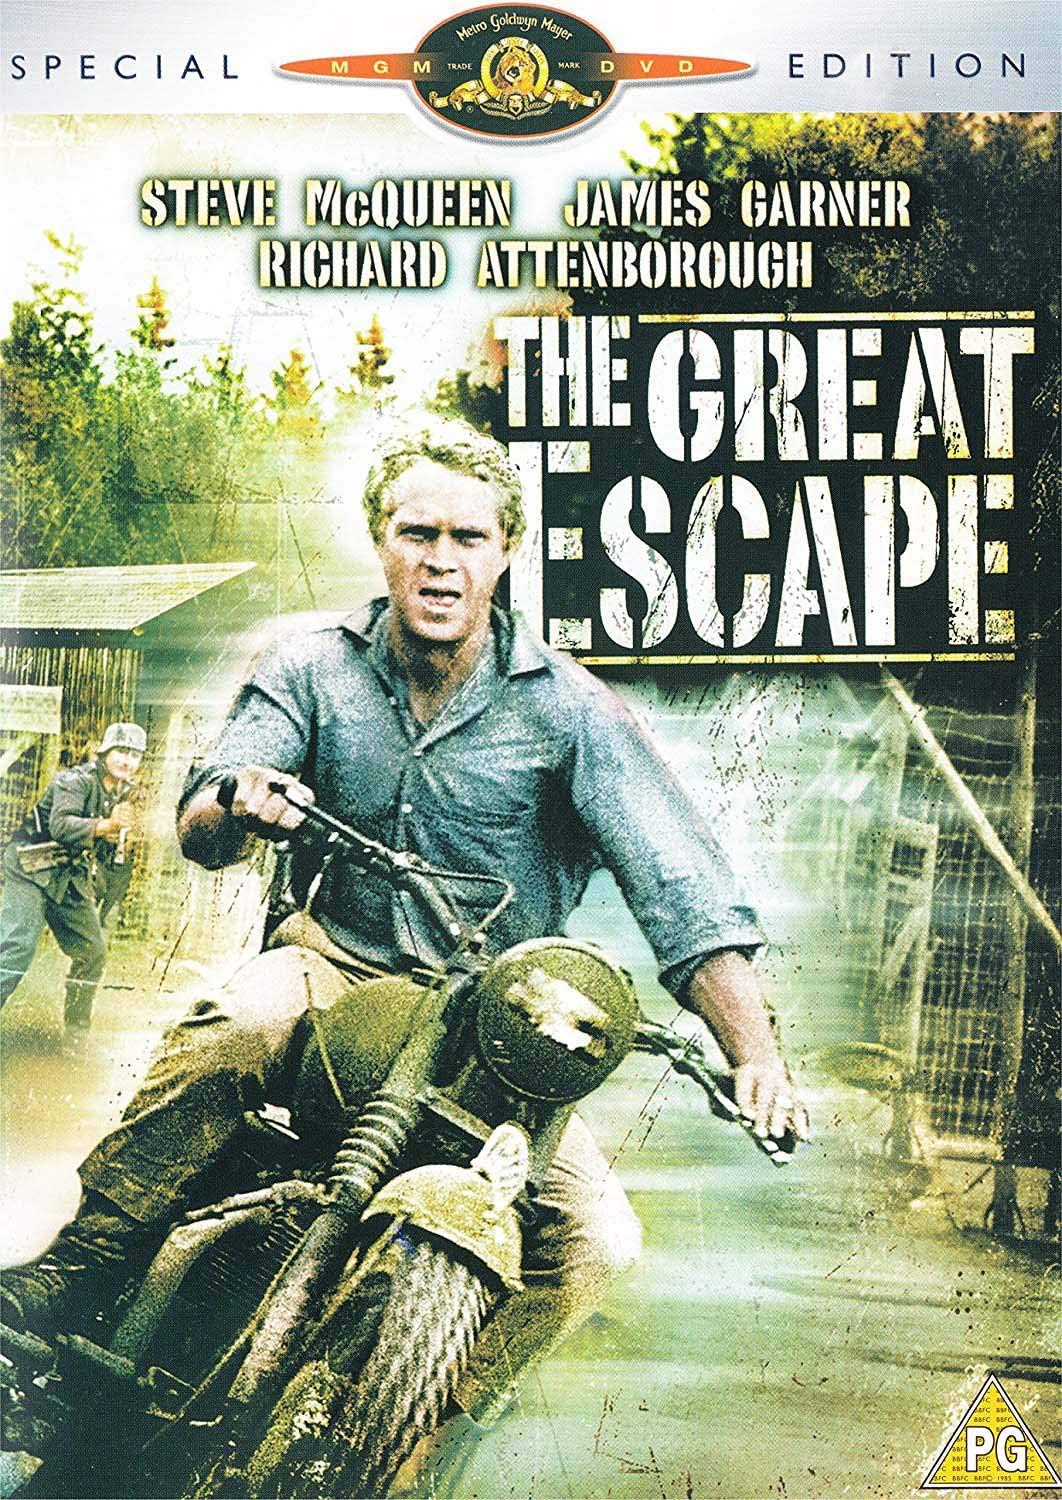 The Great Escape - Action [1963] [DVD]